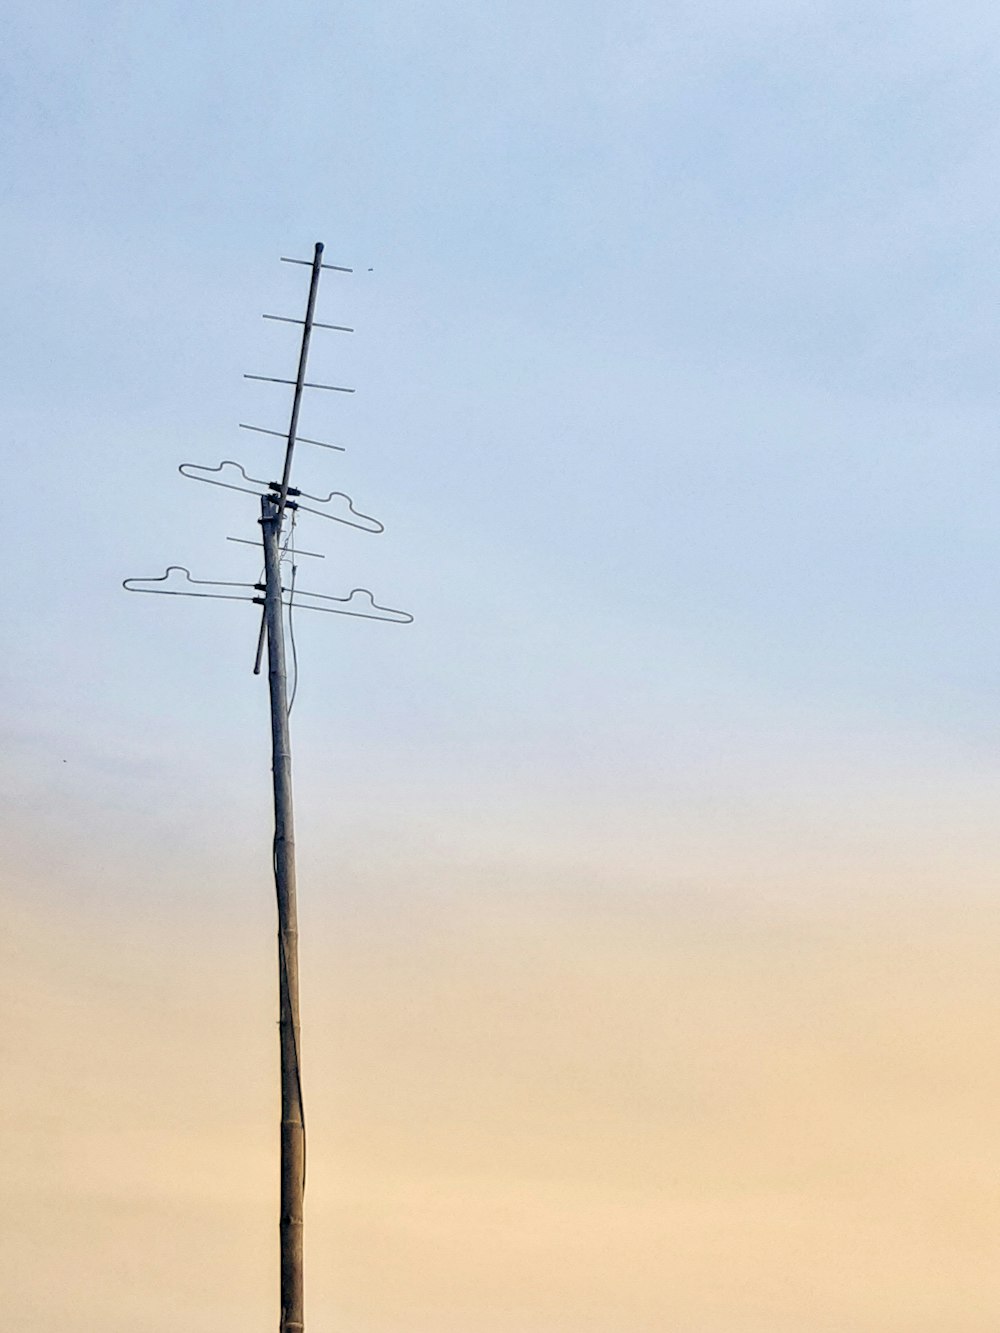 a tall wooden pole with a tv antenna on top of it